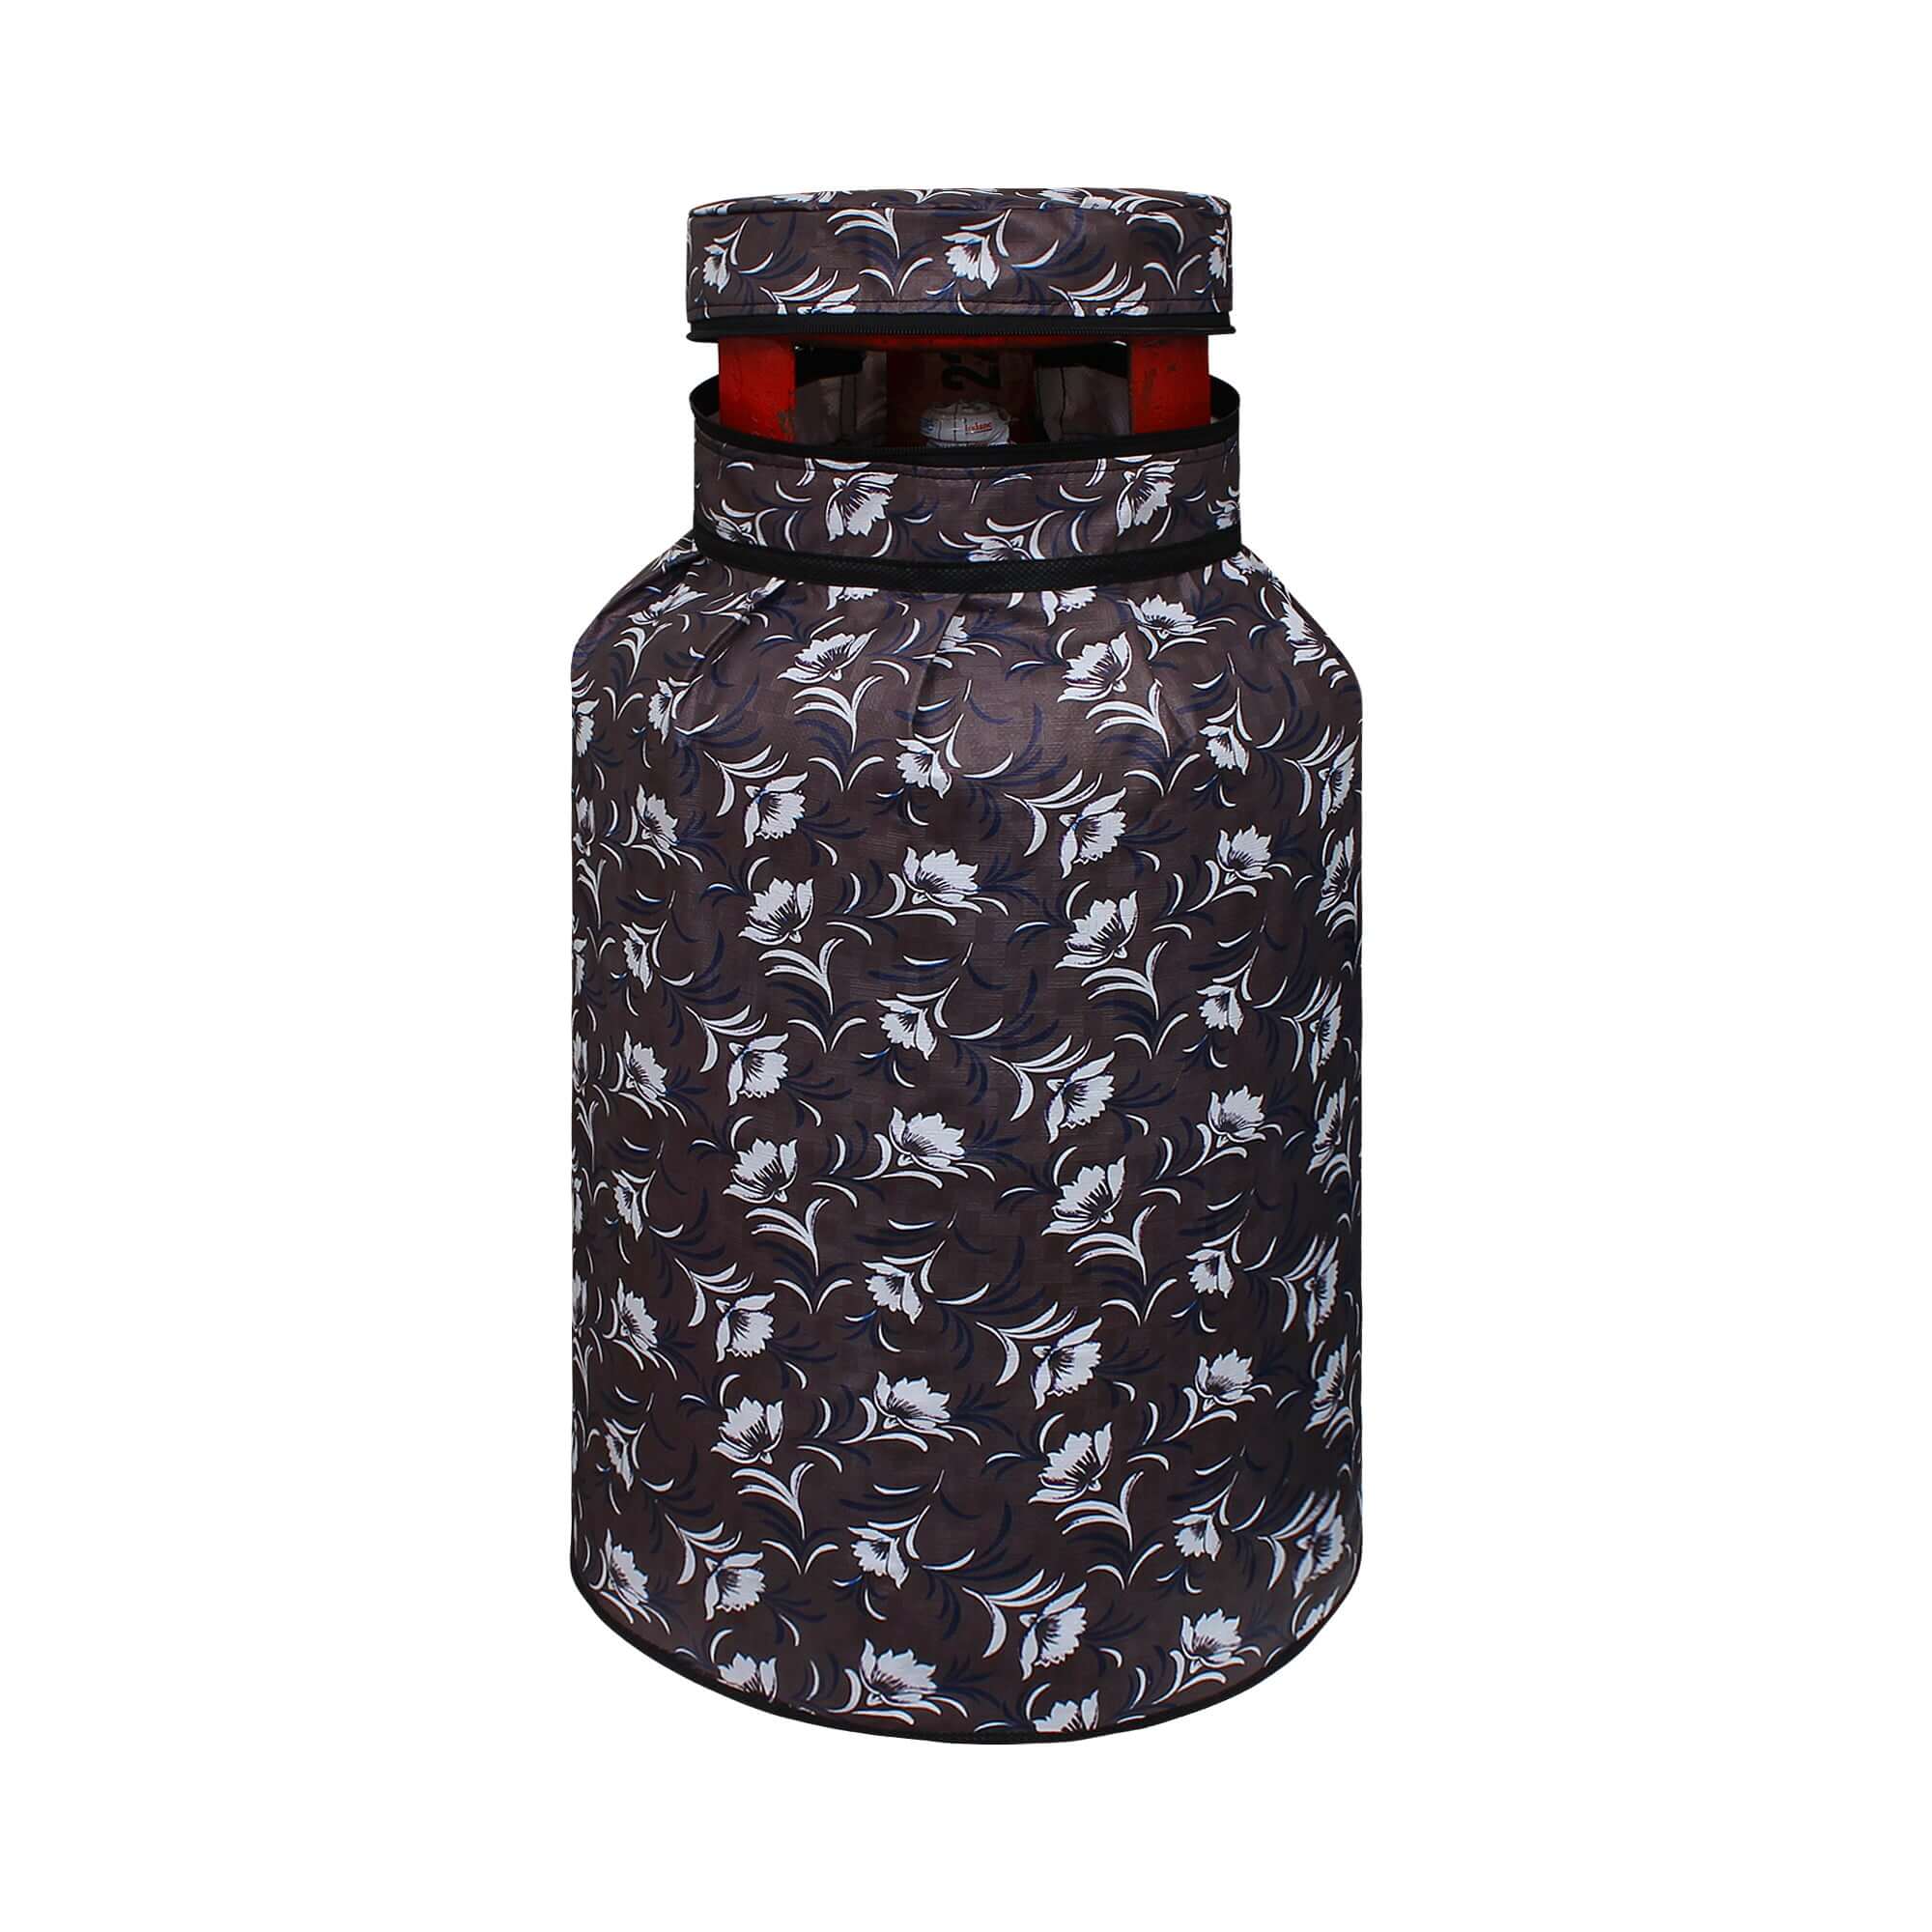 LPG Gas Cylinder Cover, SA05 - Dream Care Furnishings Private Limited